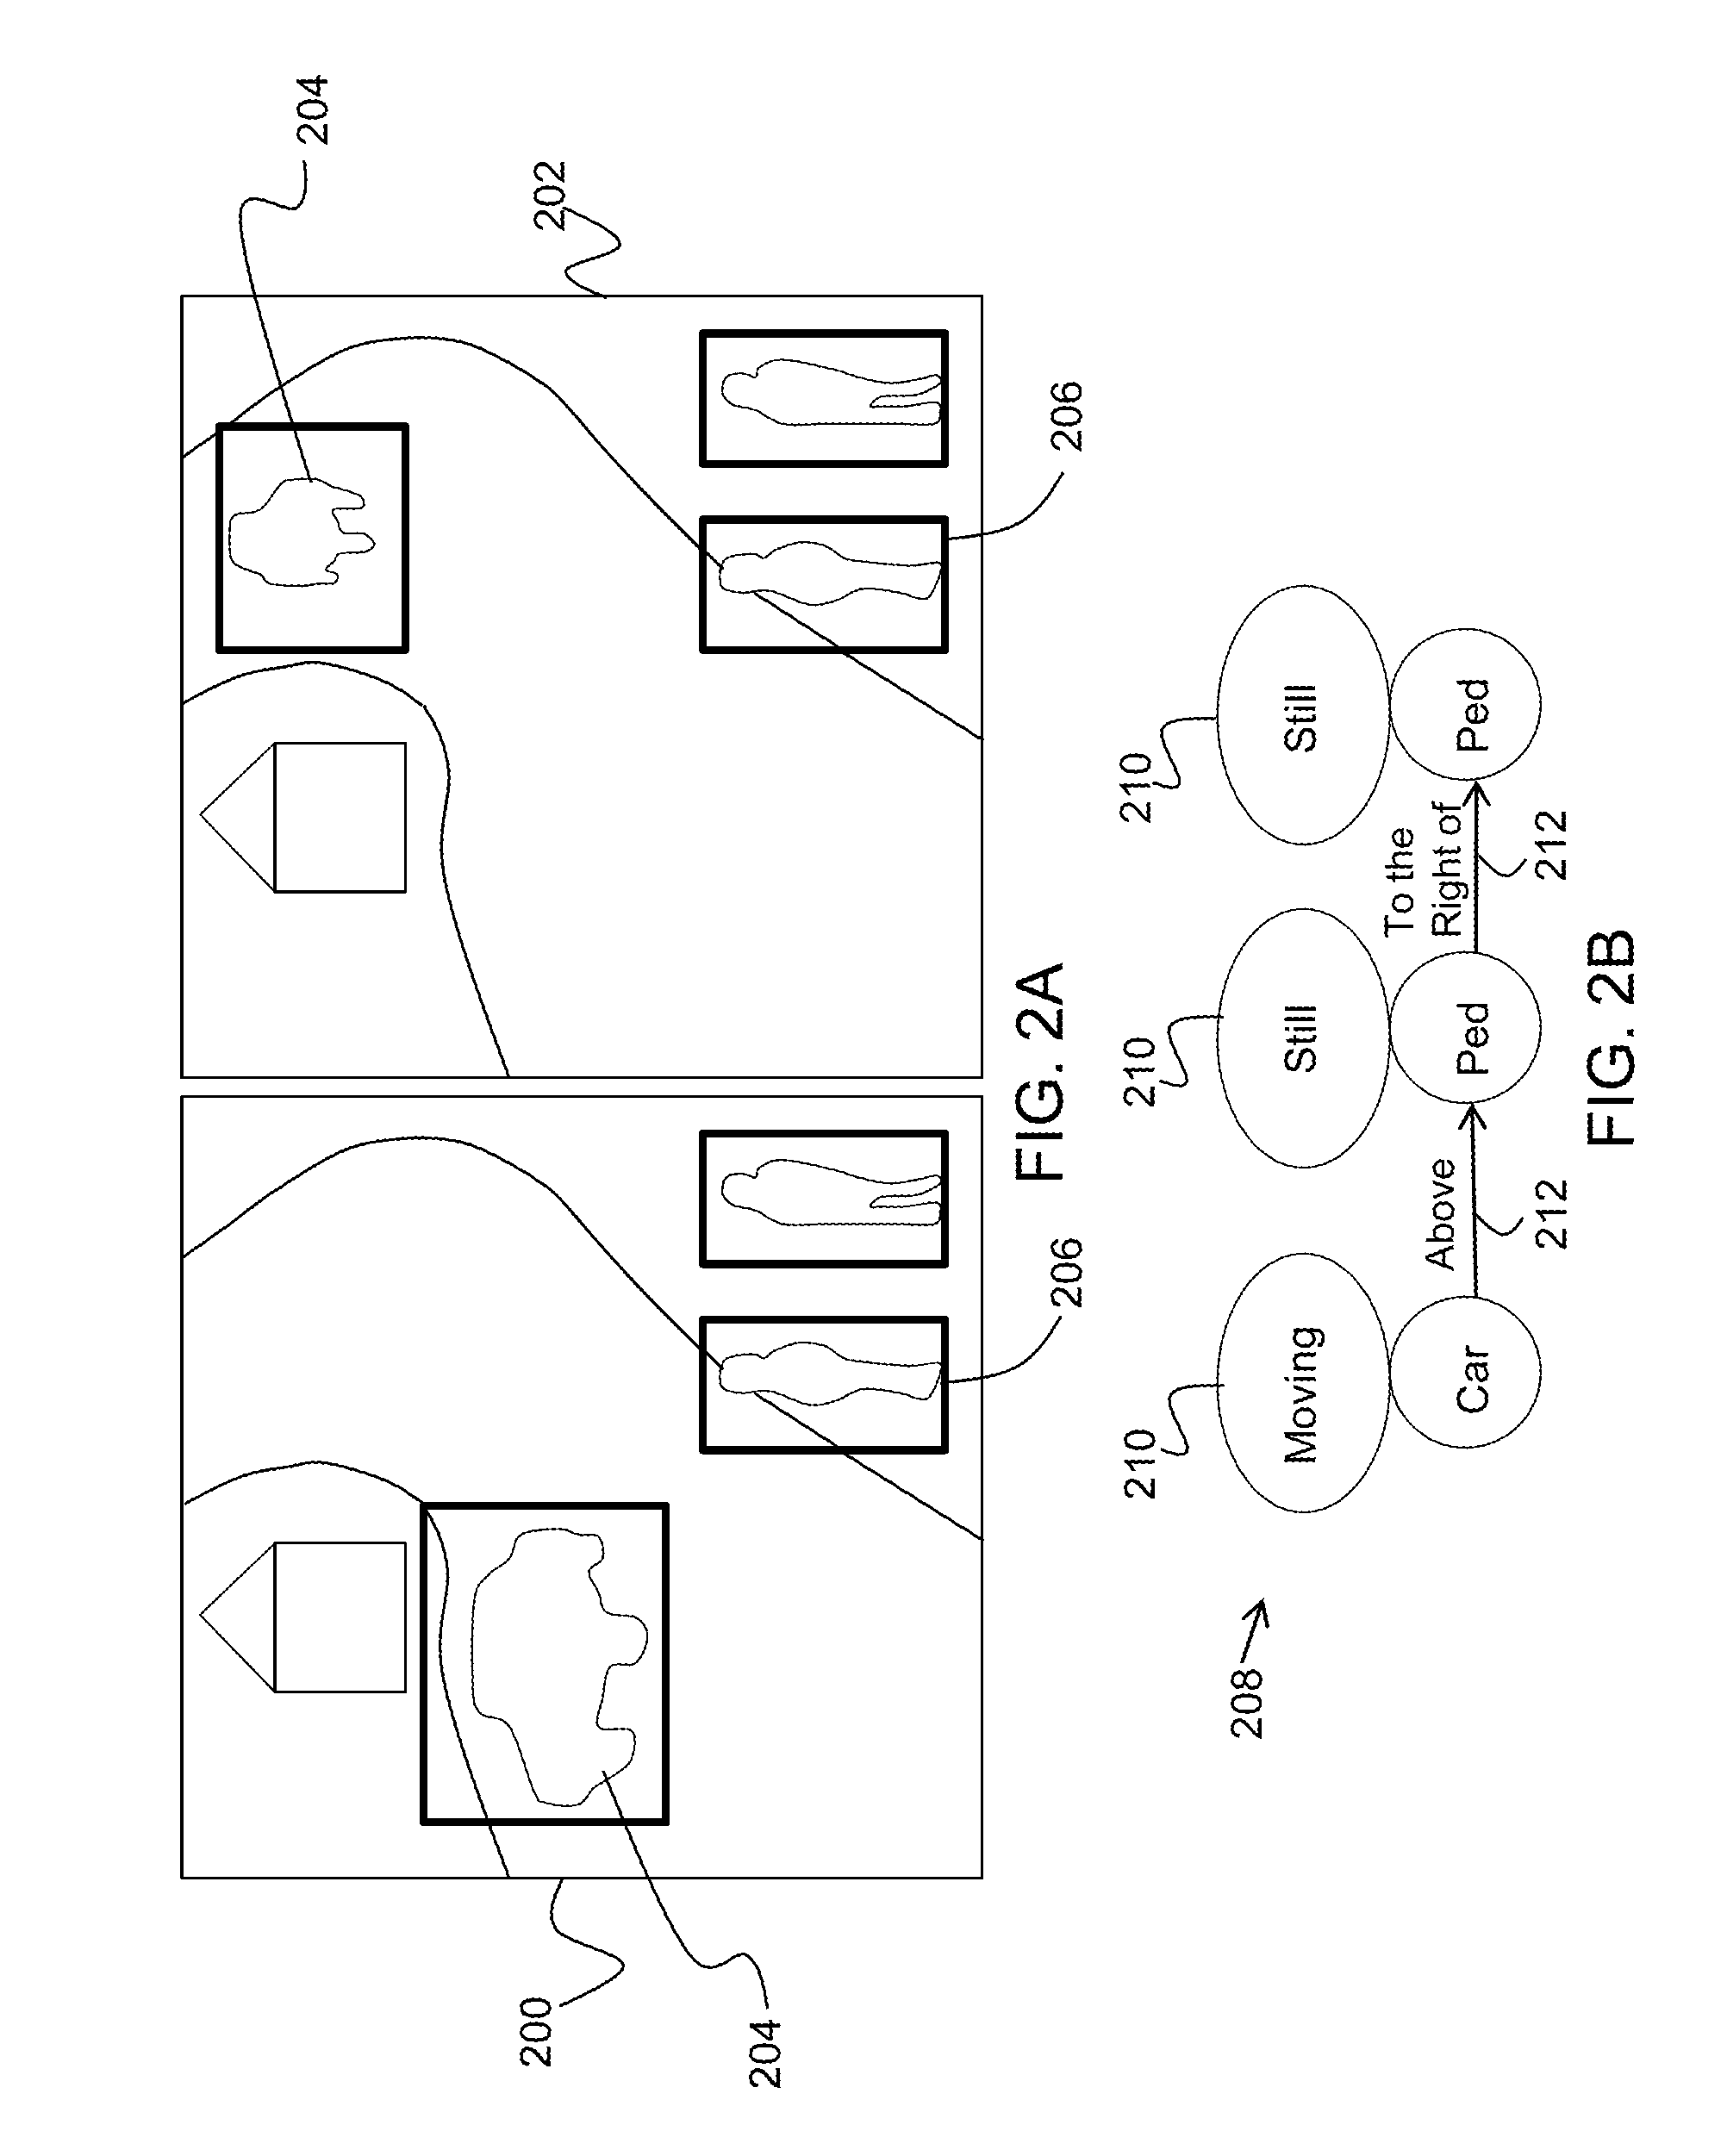 Method for online learning and recognition of visual behaviors